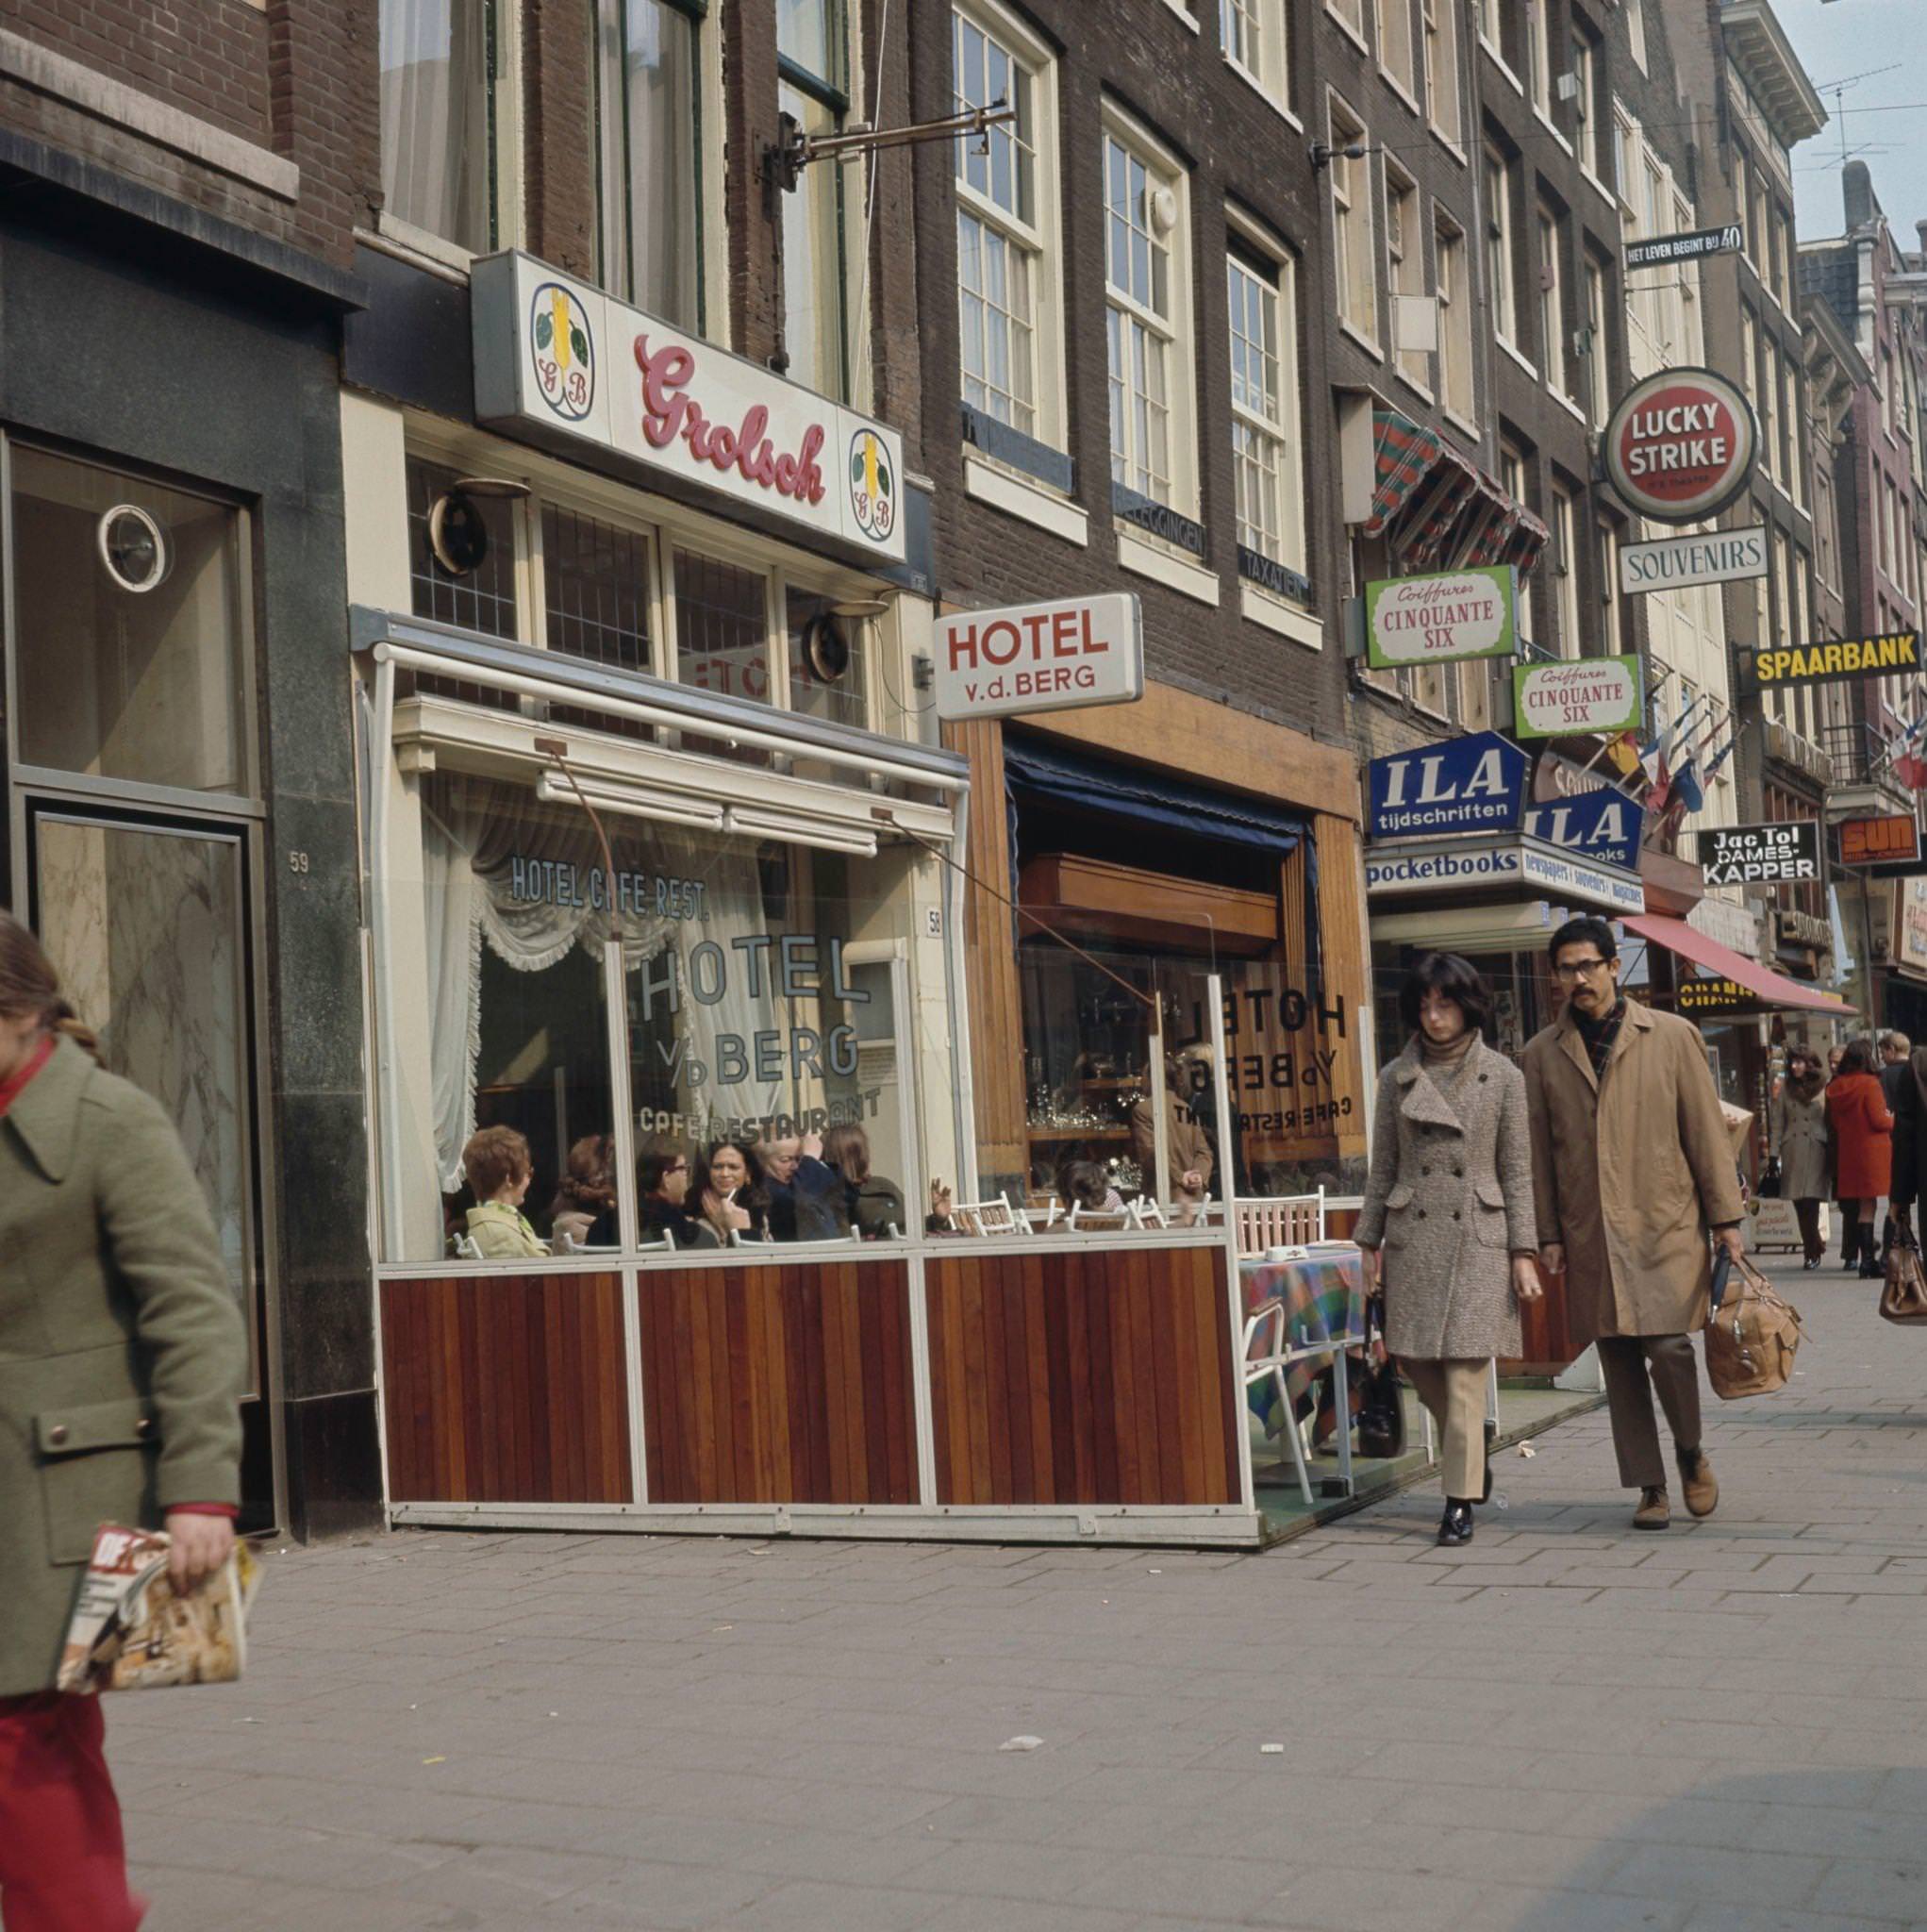 Pedestrians walk past diners seated at tables outside a cafe and restaurant on a street in the center of Amsterdam, capital city of the Netherlands, 1970.